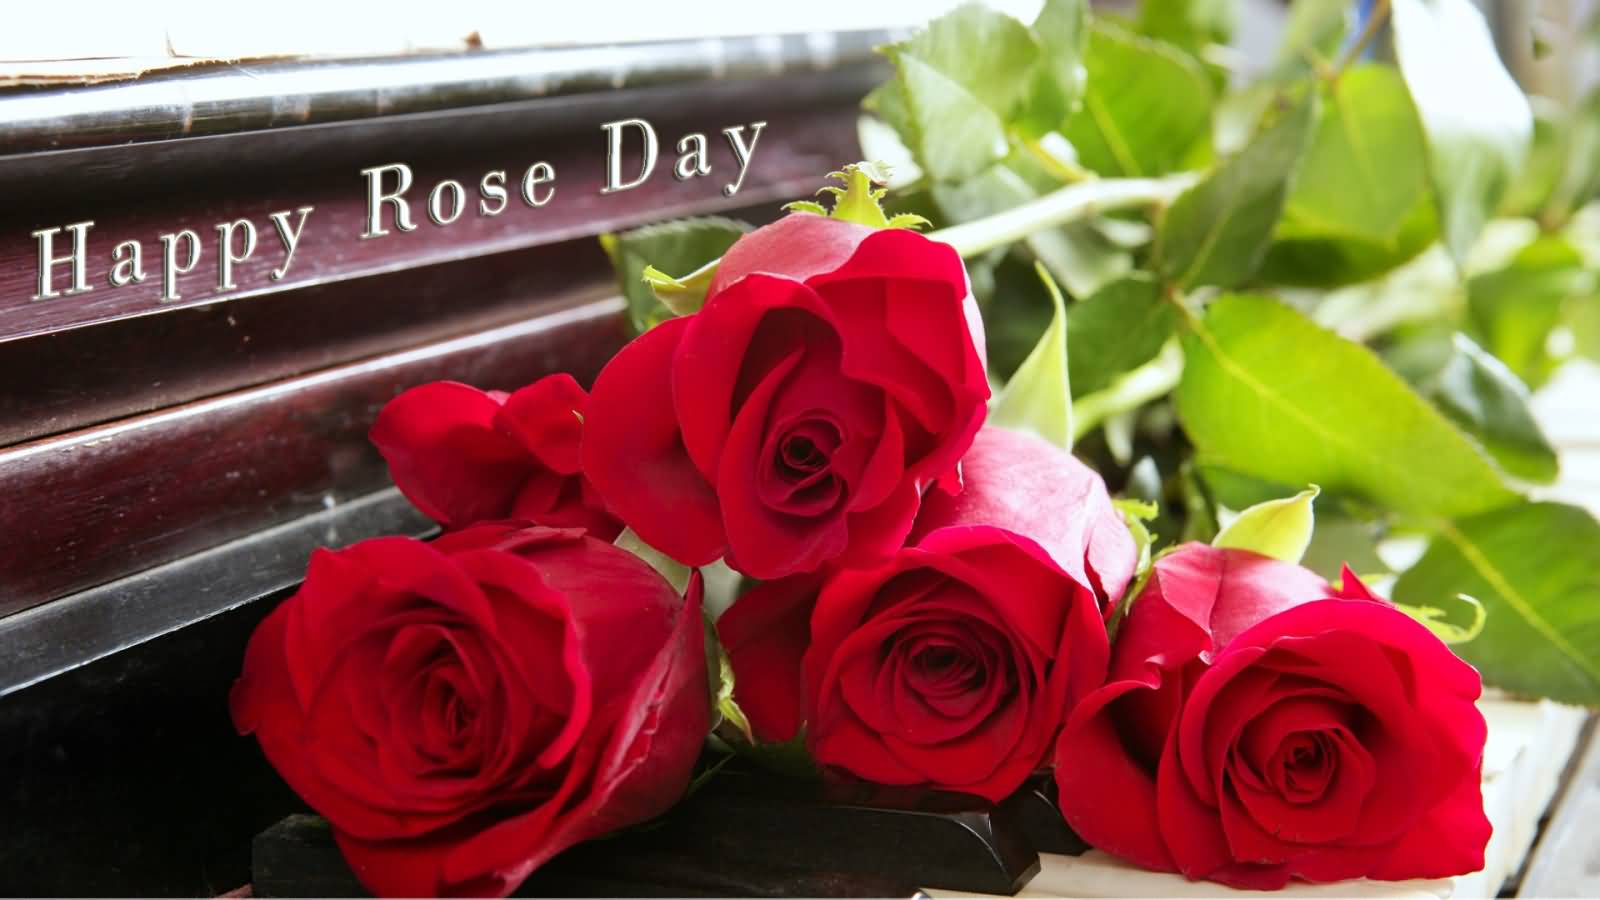 Happy Rose Day Rose Buds